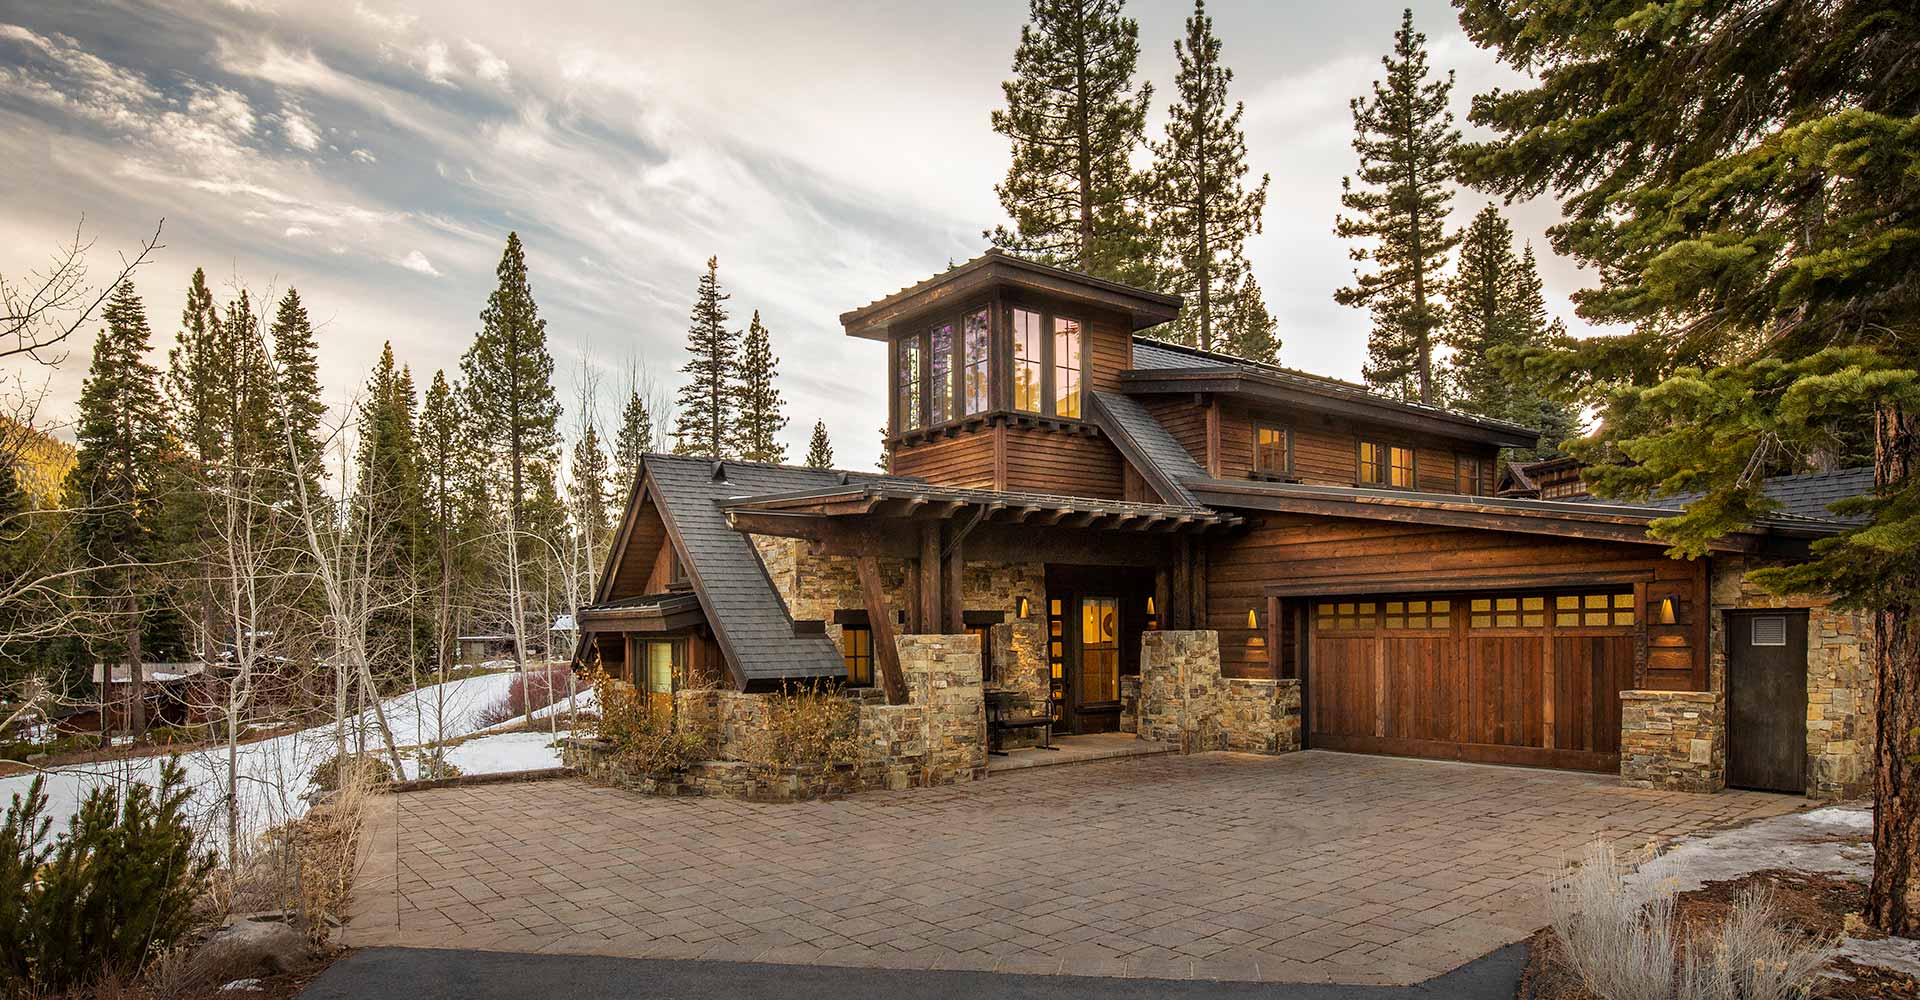 Luxury Truckee Homes for sale - 10331 Olana Drive